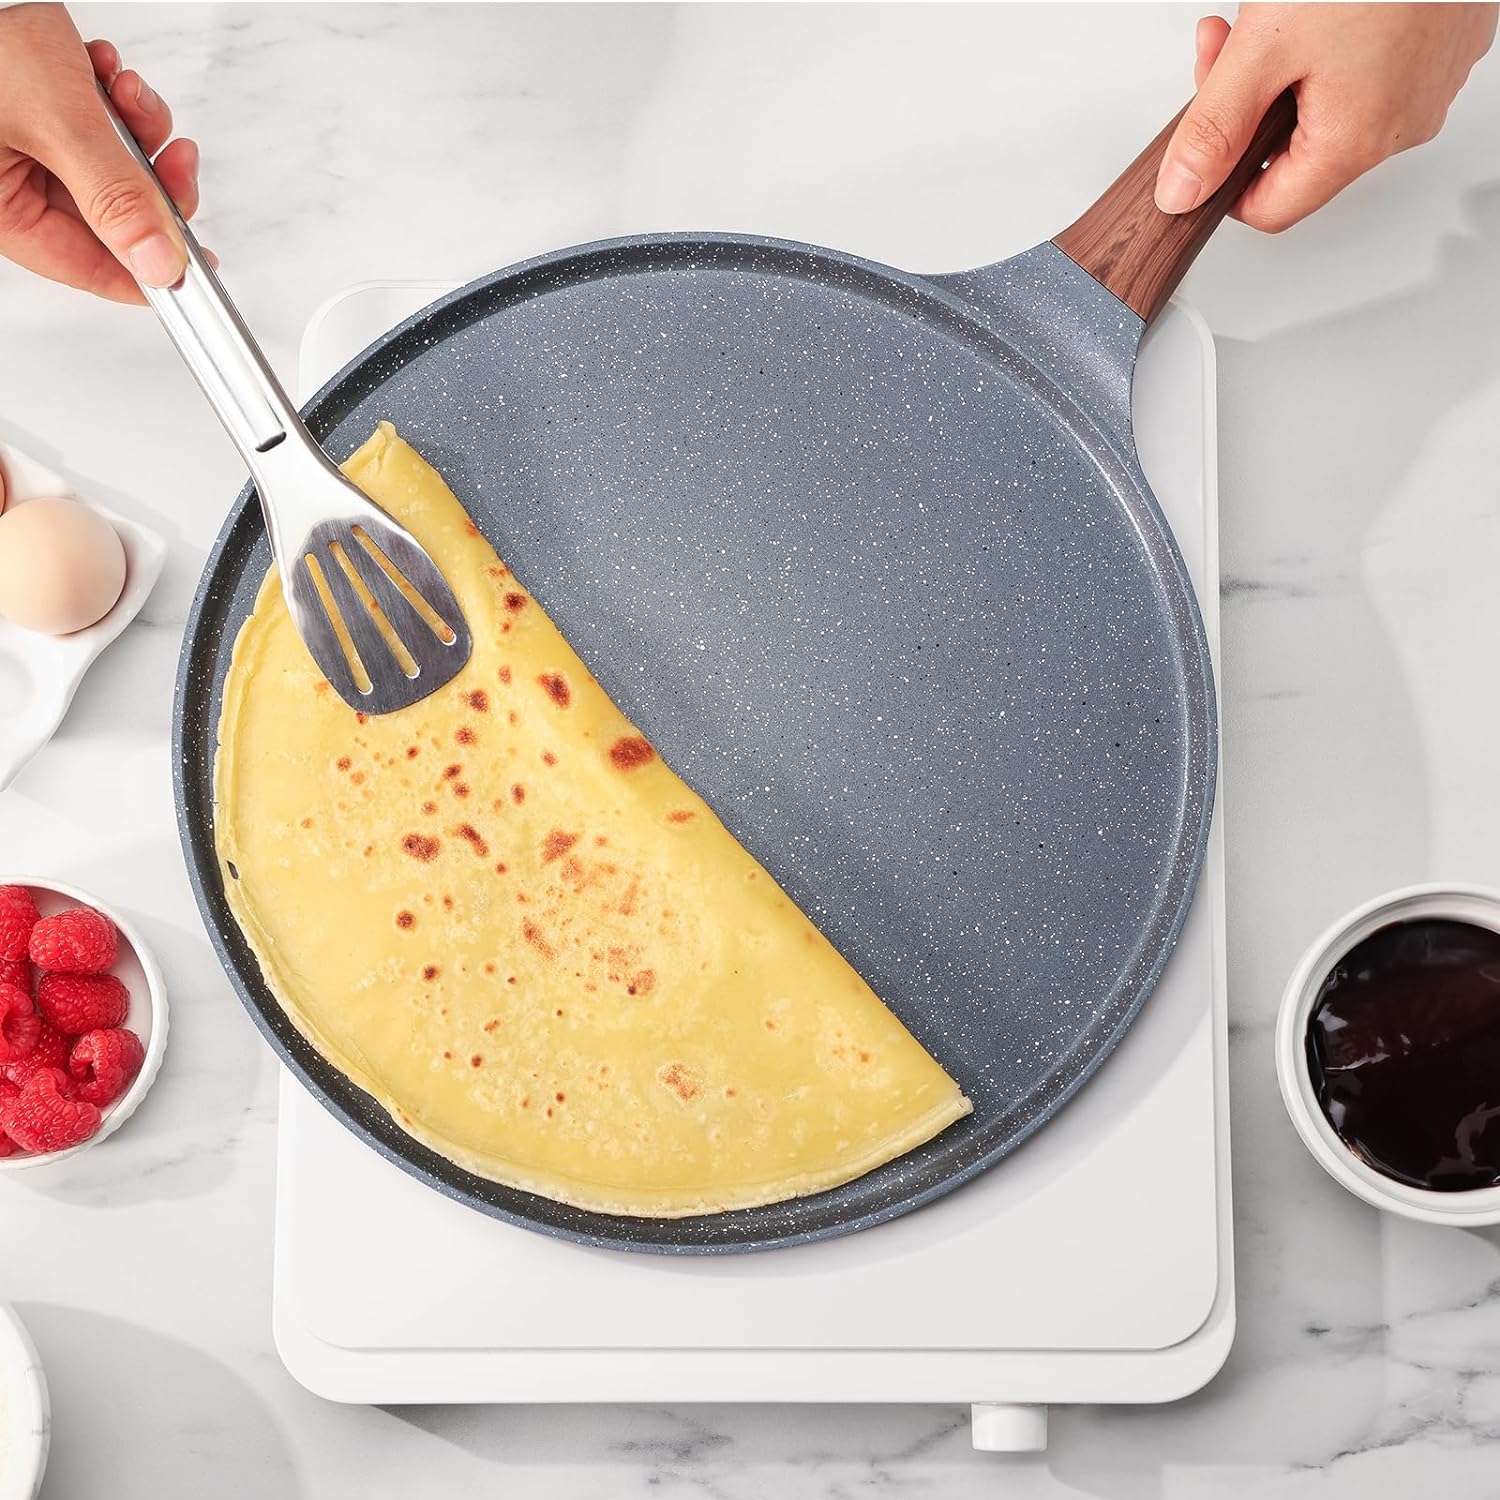 Crepe Pan, Pancake Pan, Dosa Tawa Pan Nonstick Flat Griddle Frying Skillet  Pan with Granite Coating & Solid Wood Handle for Omelette, Tortillas,  Induction Compatible, 10 Inch 